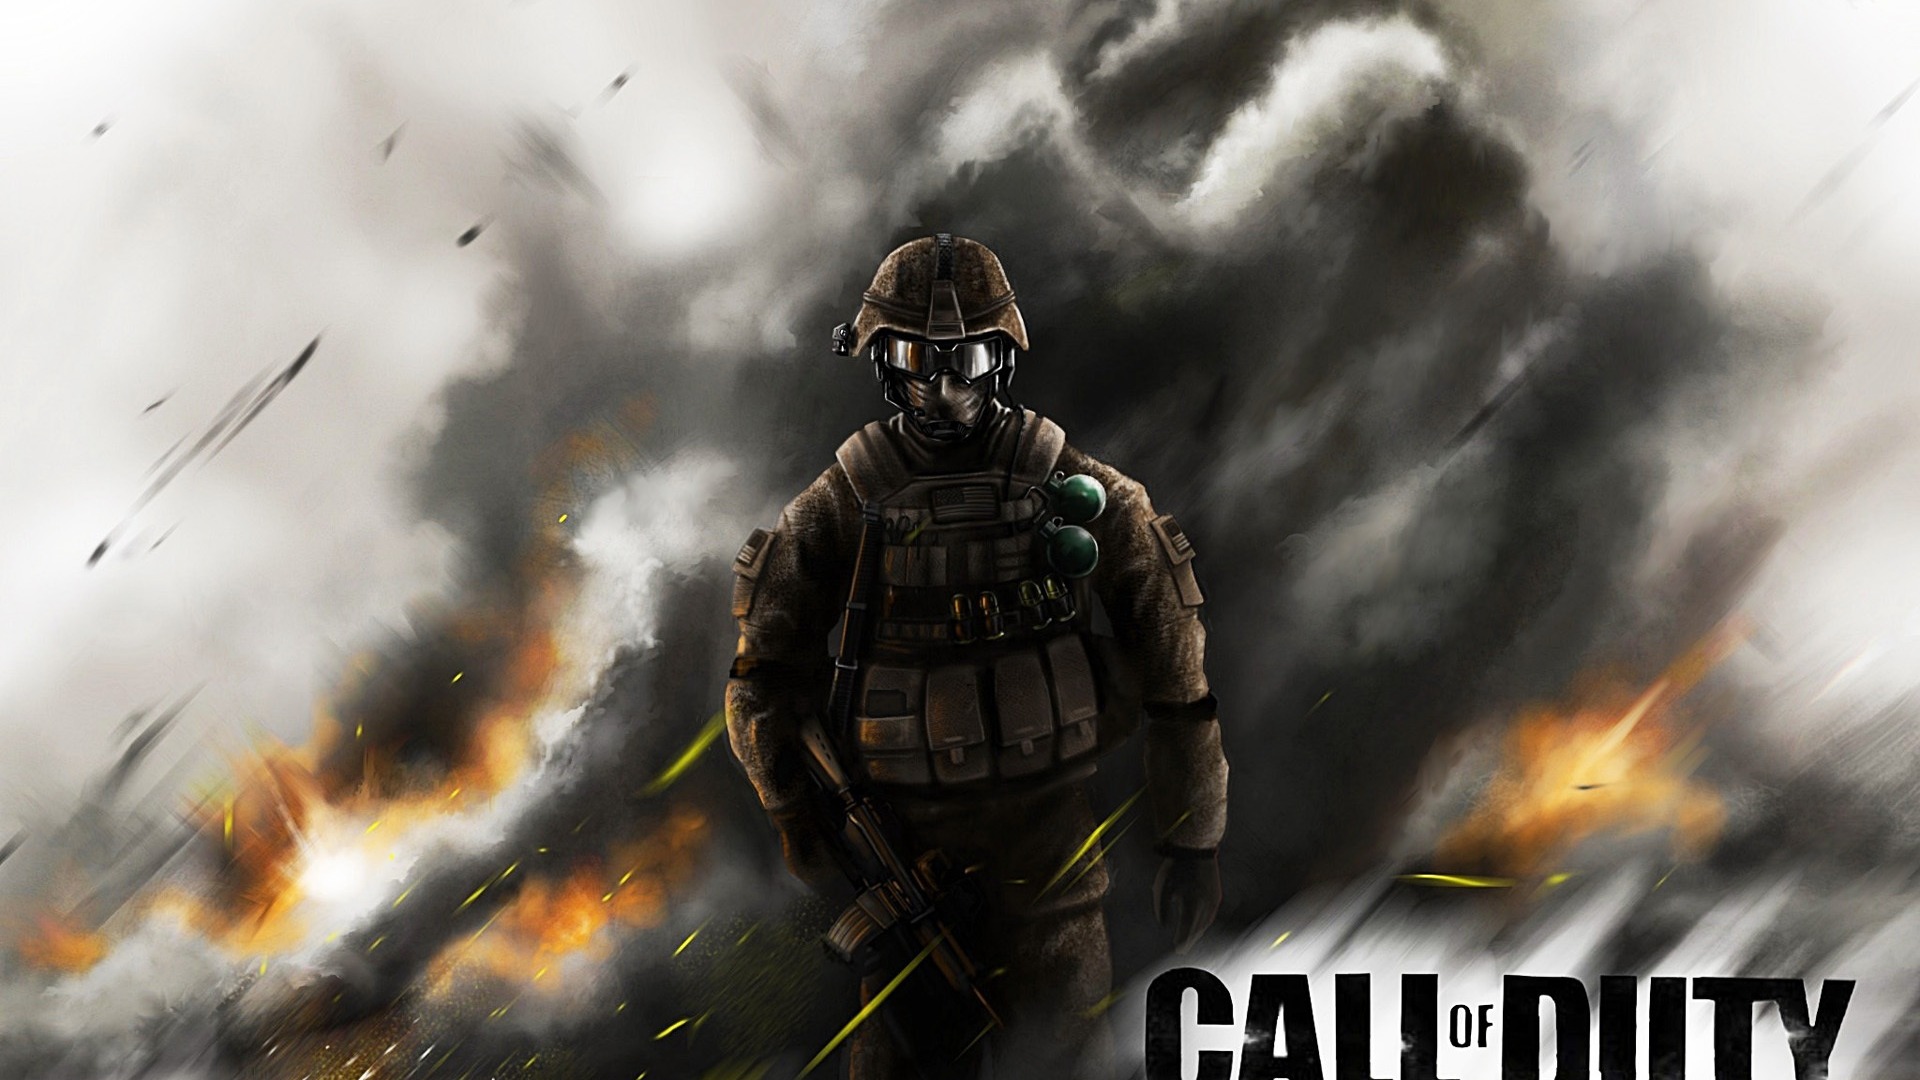 Call of Duty: MW3 HD wallpapers #15 - 1920x1080